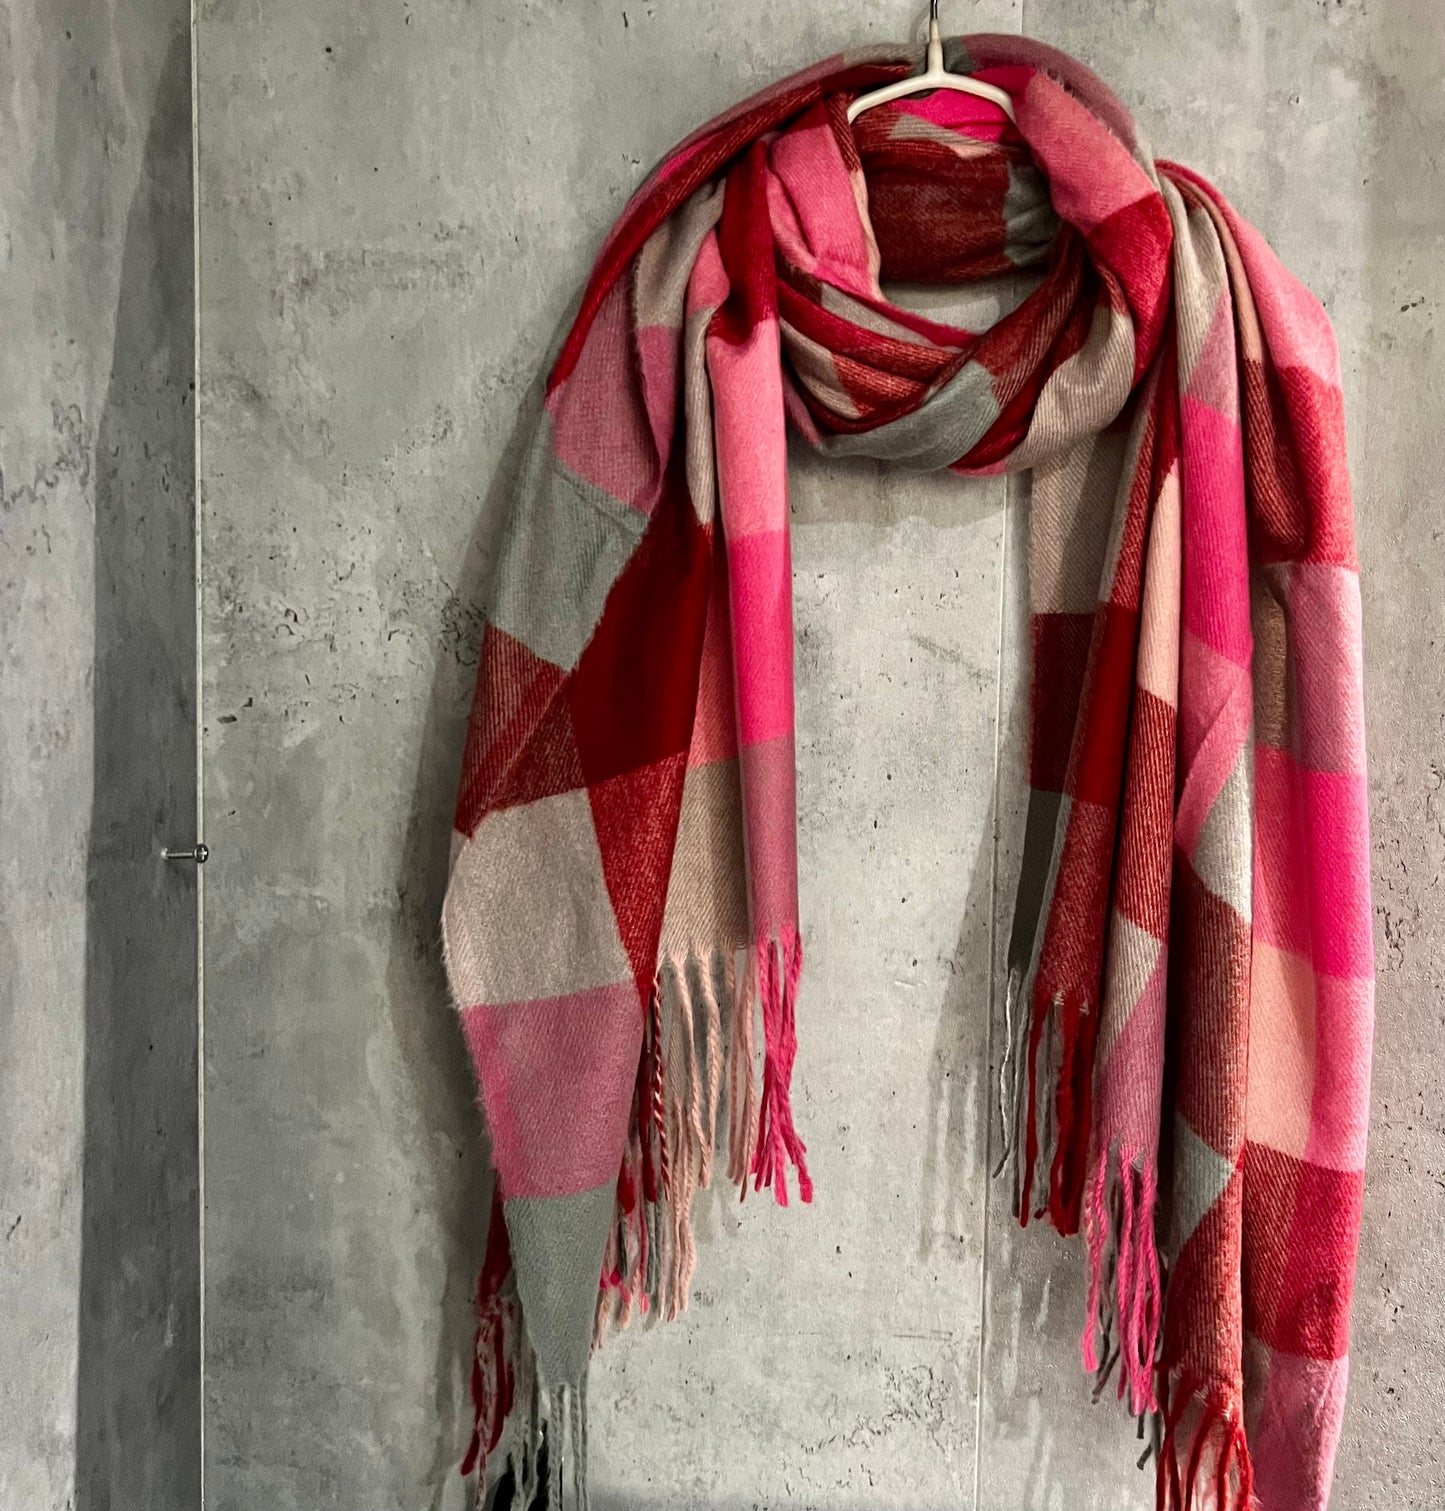 Checked Pattern Pink Red Beige Cashmere Blend Scarf/Winter Autumn Scarf/Gifts For Mum/Gifts For Her/Scarf Women/Christmas Birthday Gifts